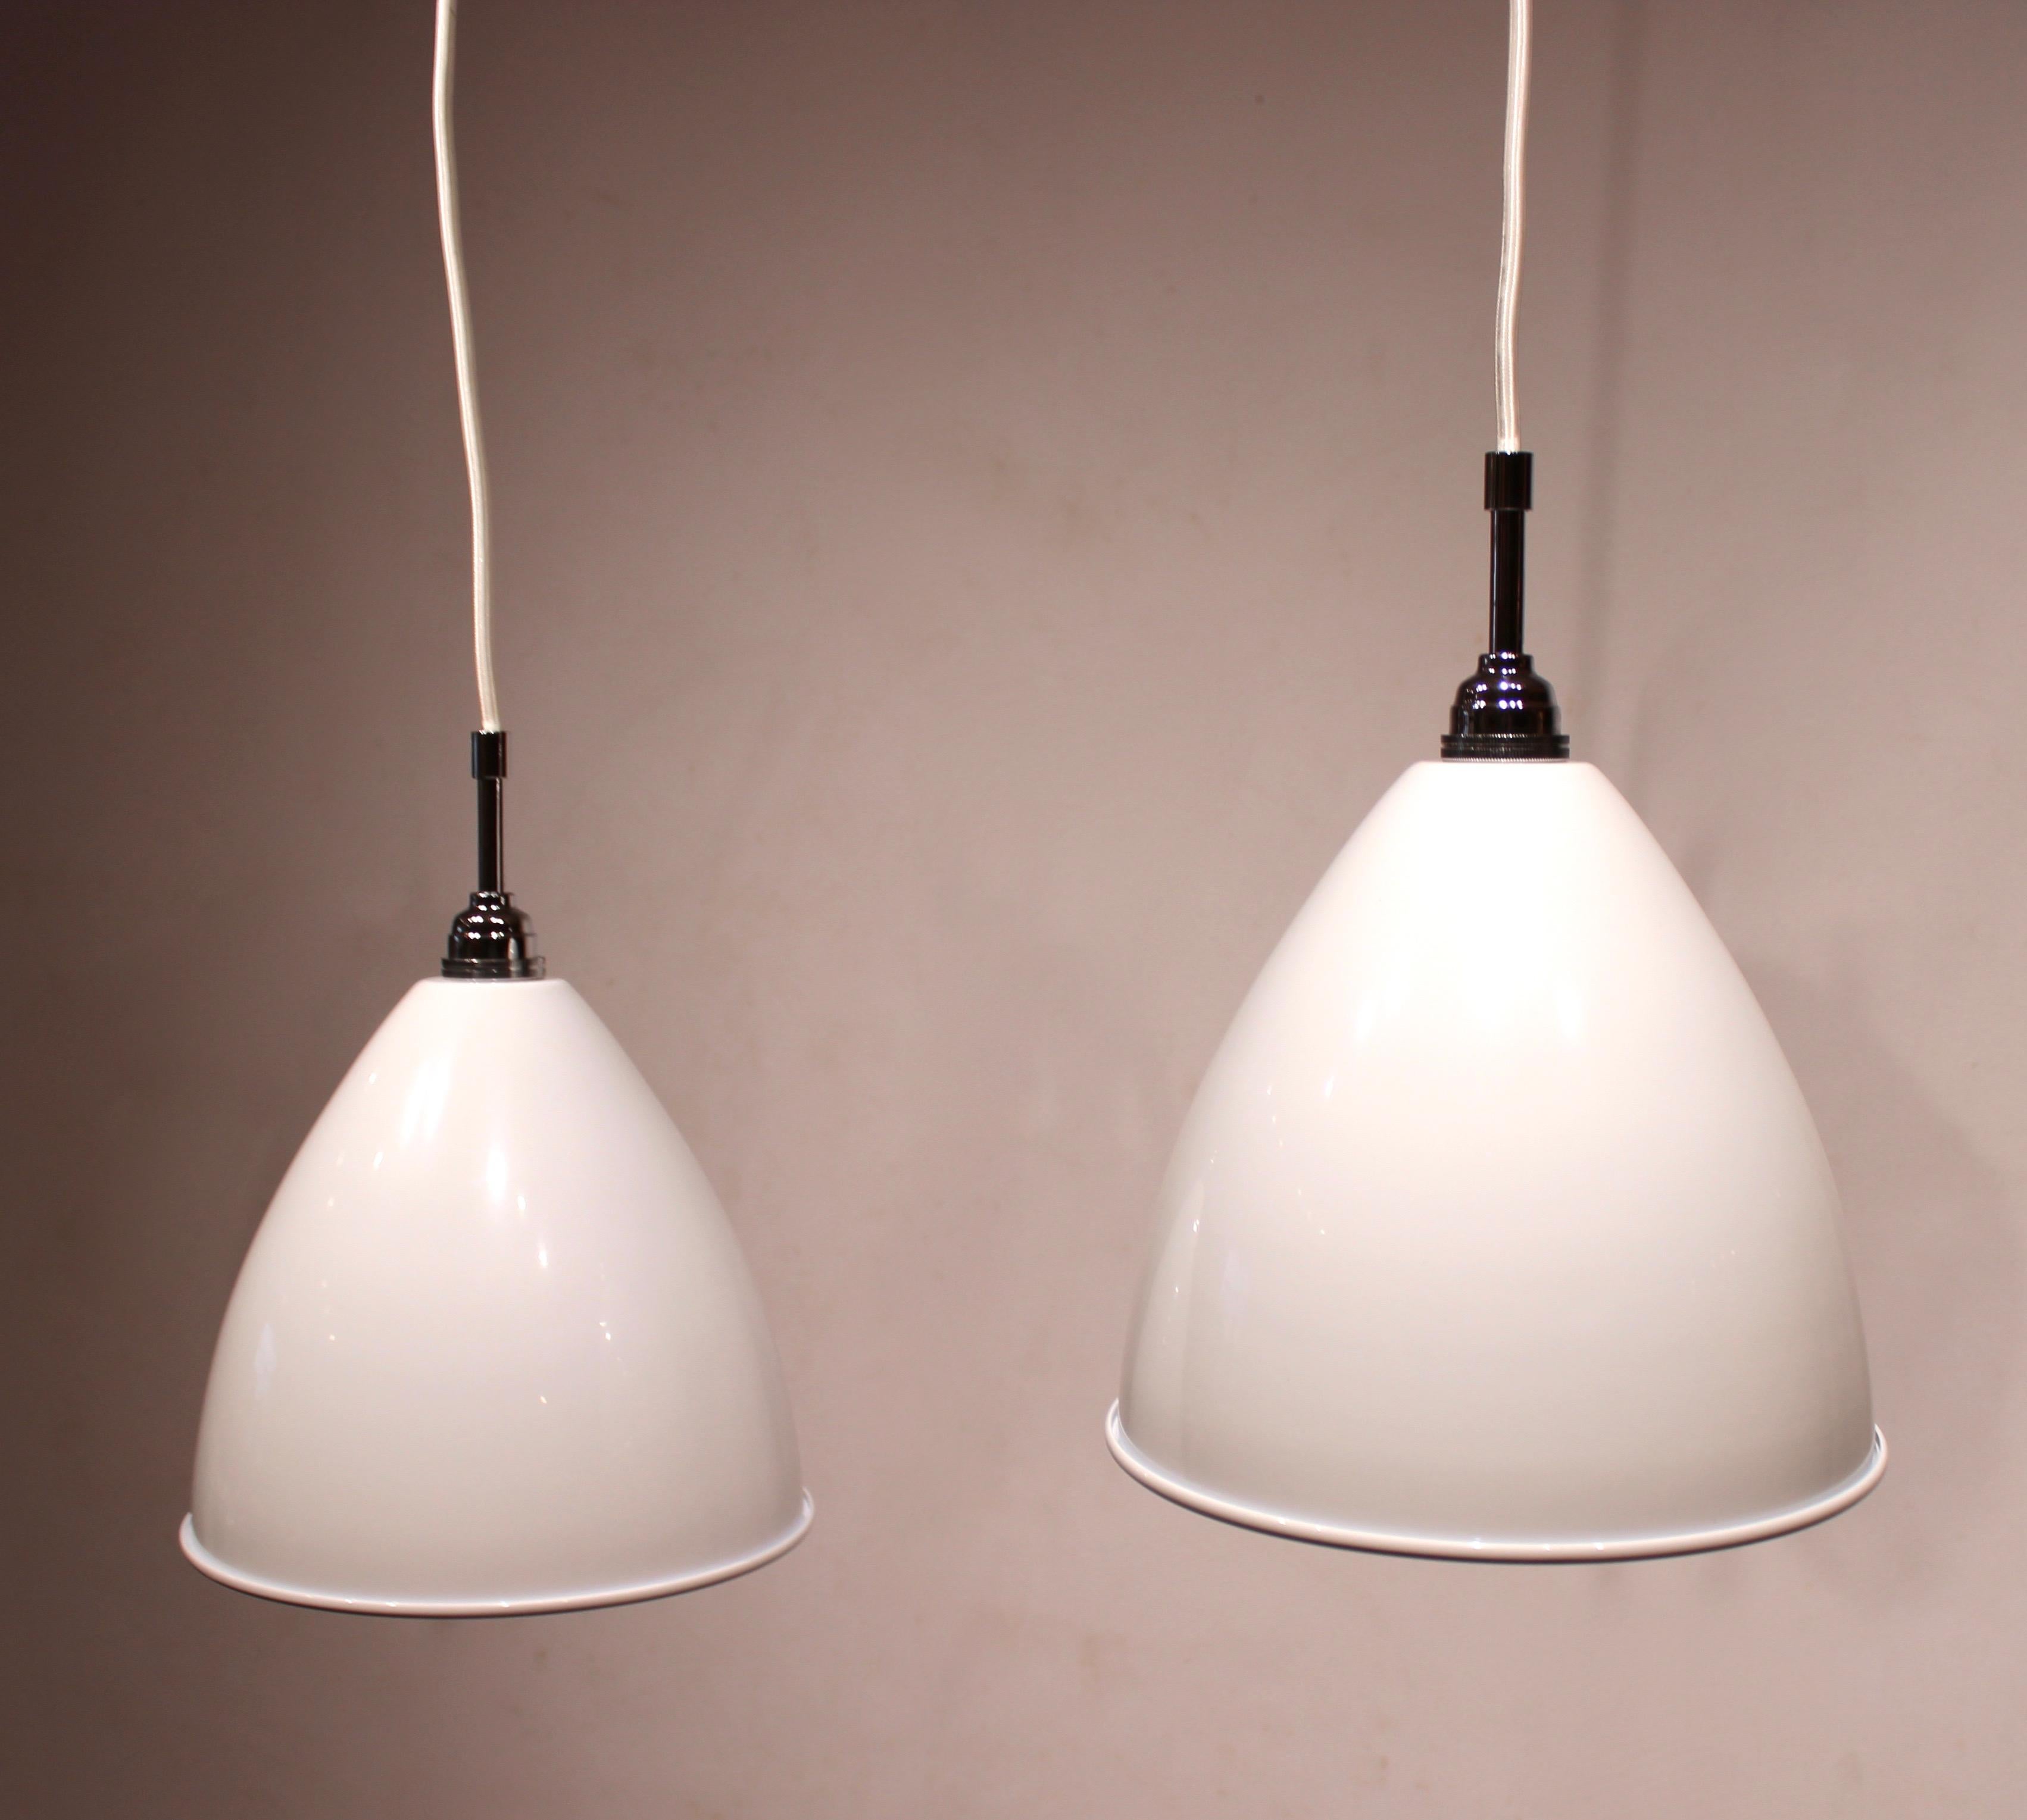 A pair of white bestlite pendants, model BL9, by Robert Dudley Best for Gubi. The pendants are in great vintage condition.